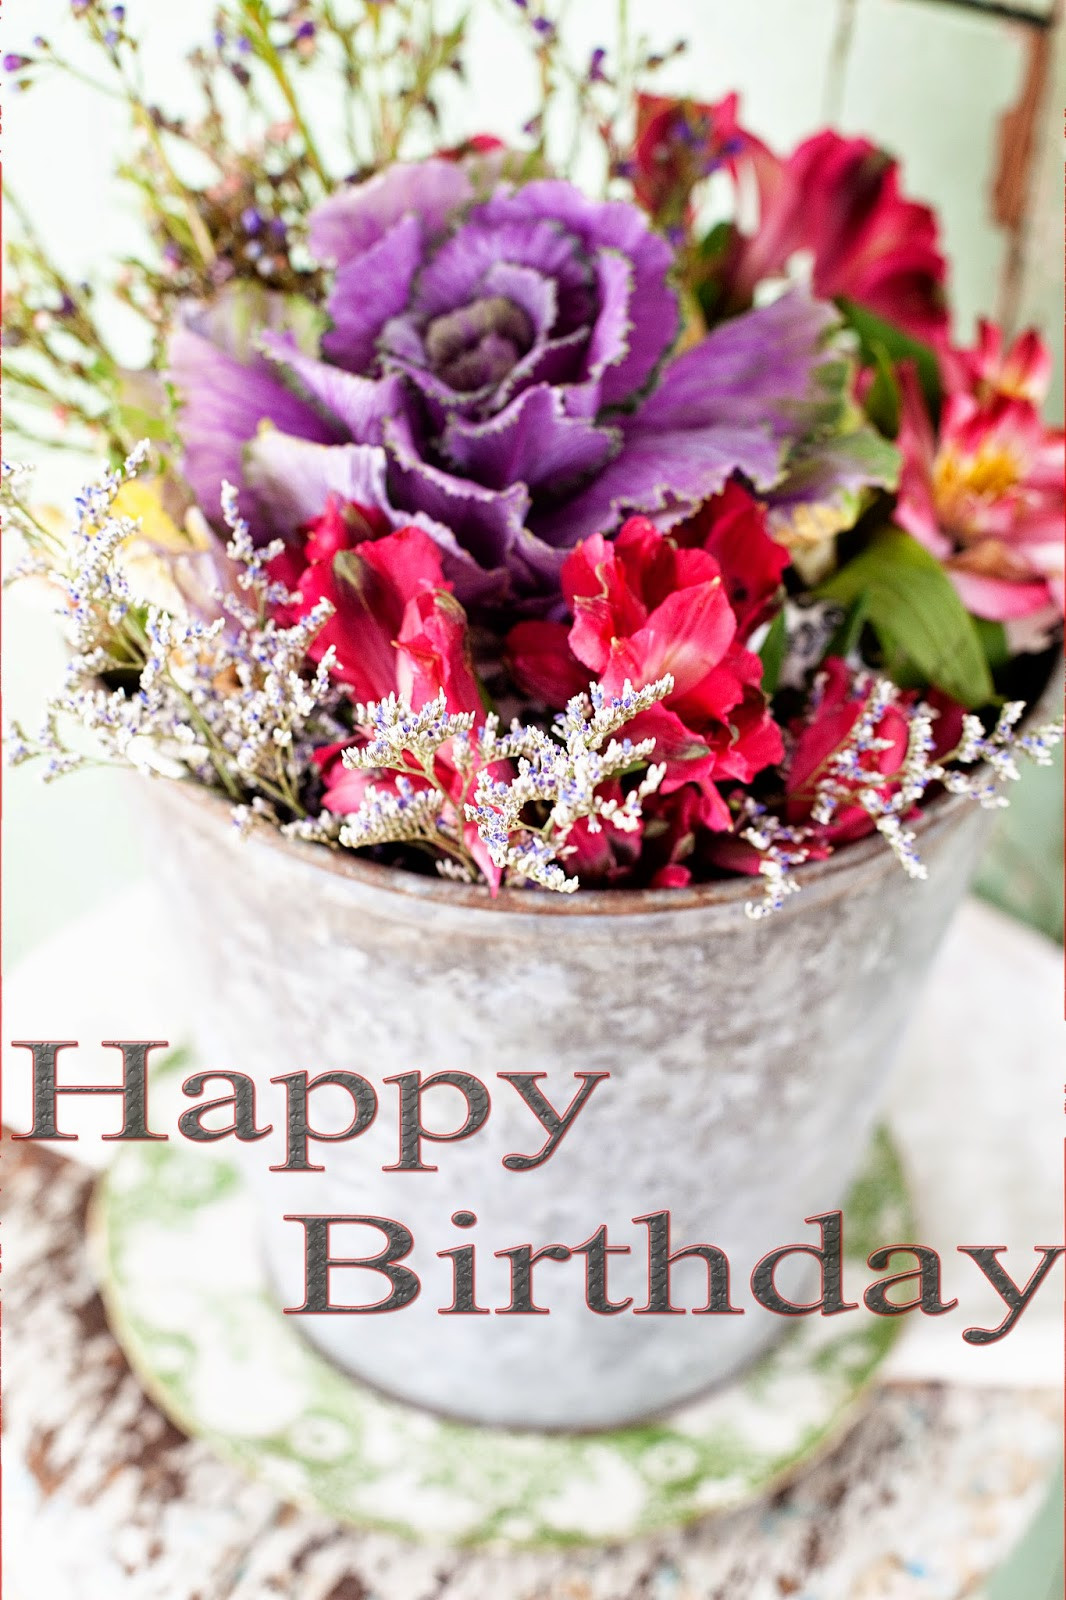 Happy Birthday Flowers And Cake
 Happy birthday cake and flowers images Greetings Wishes